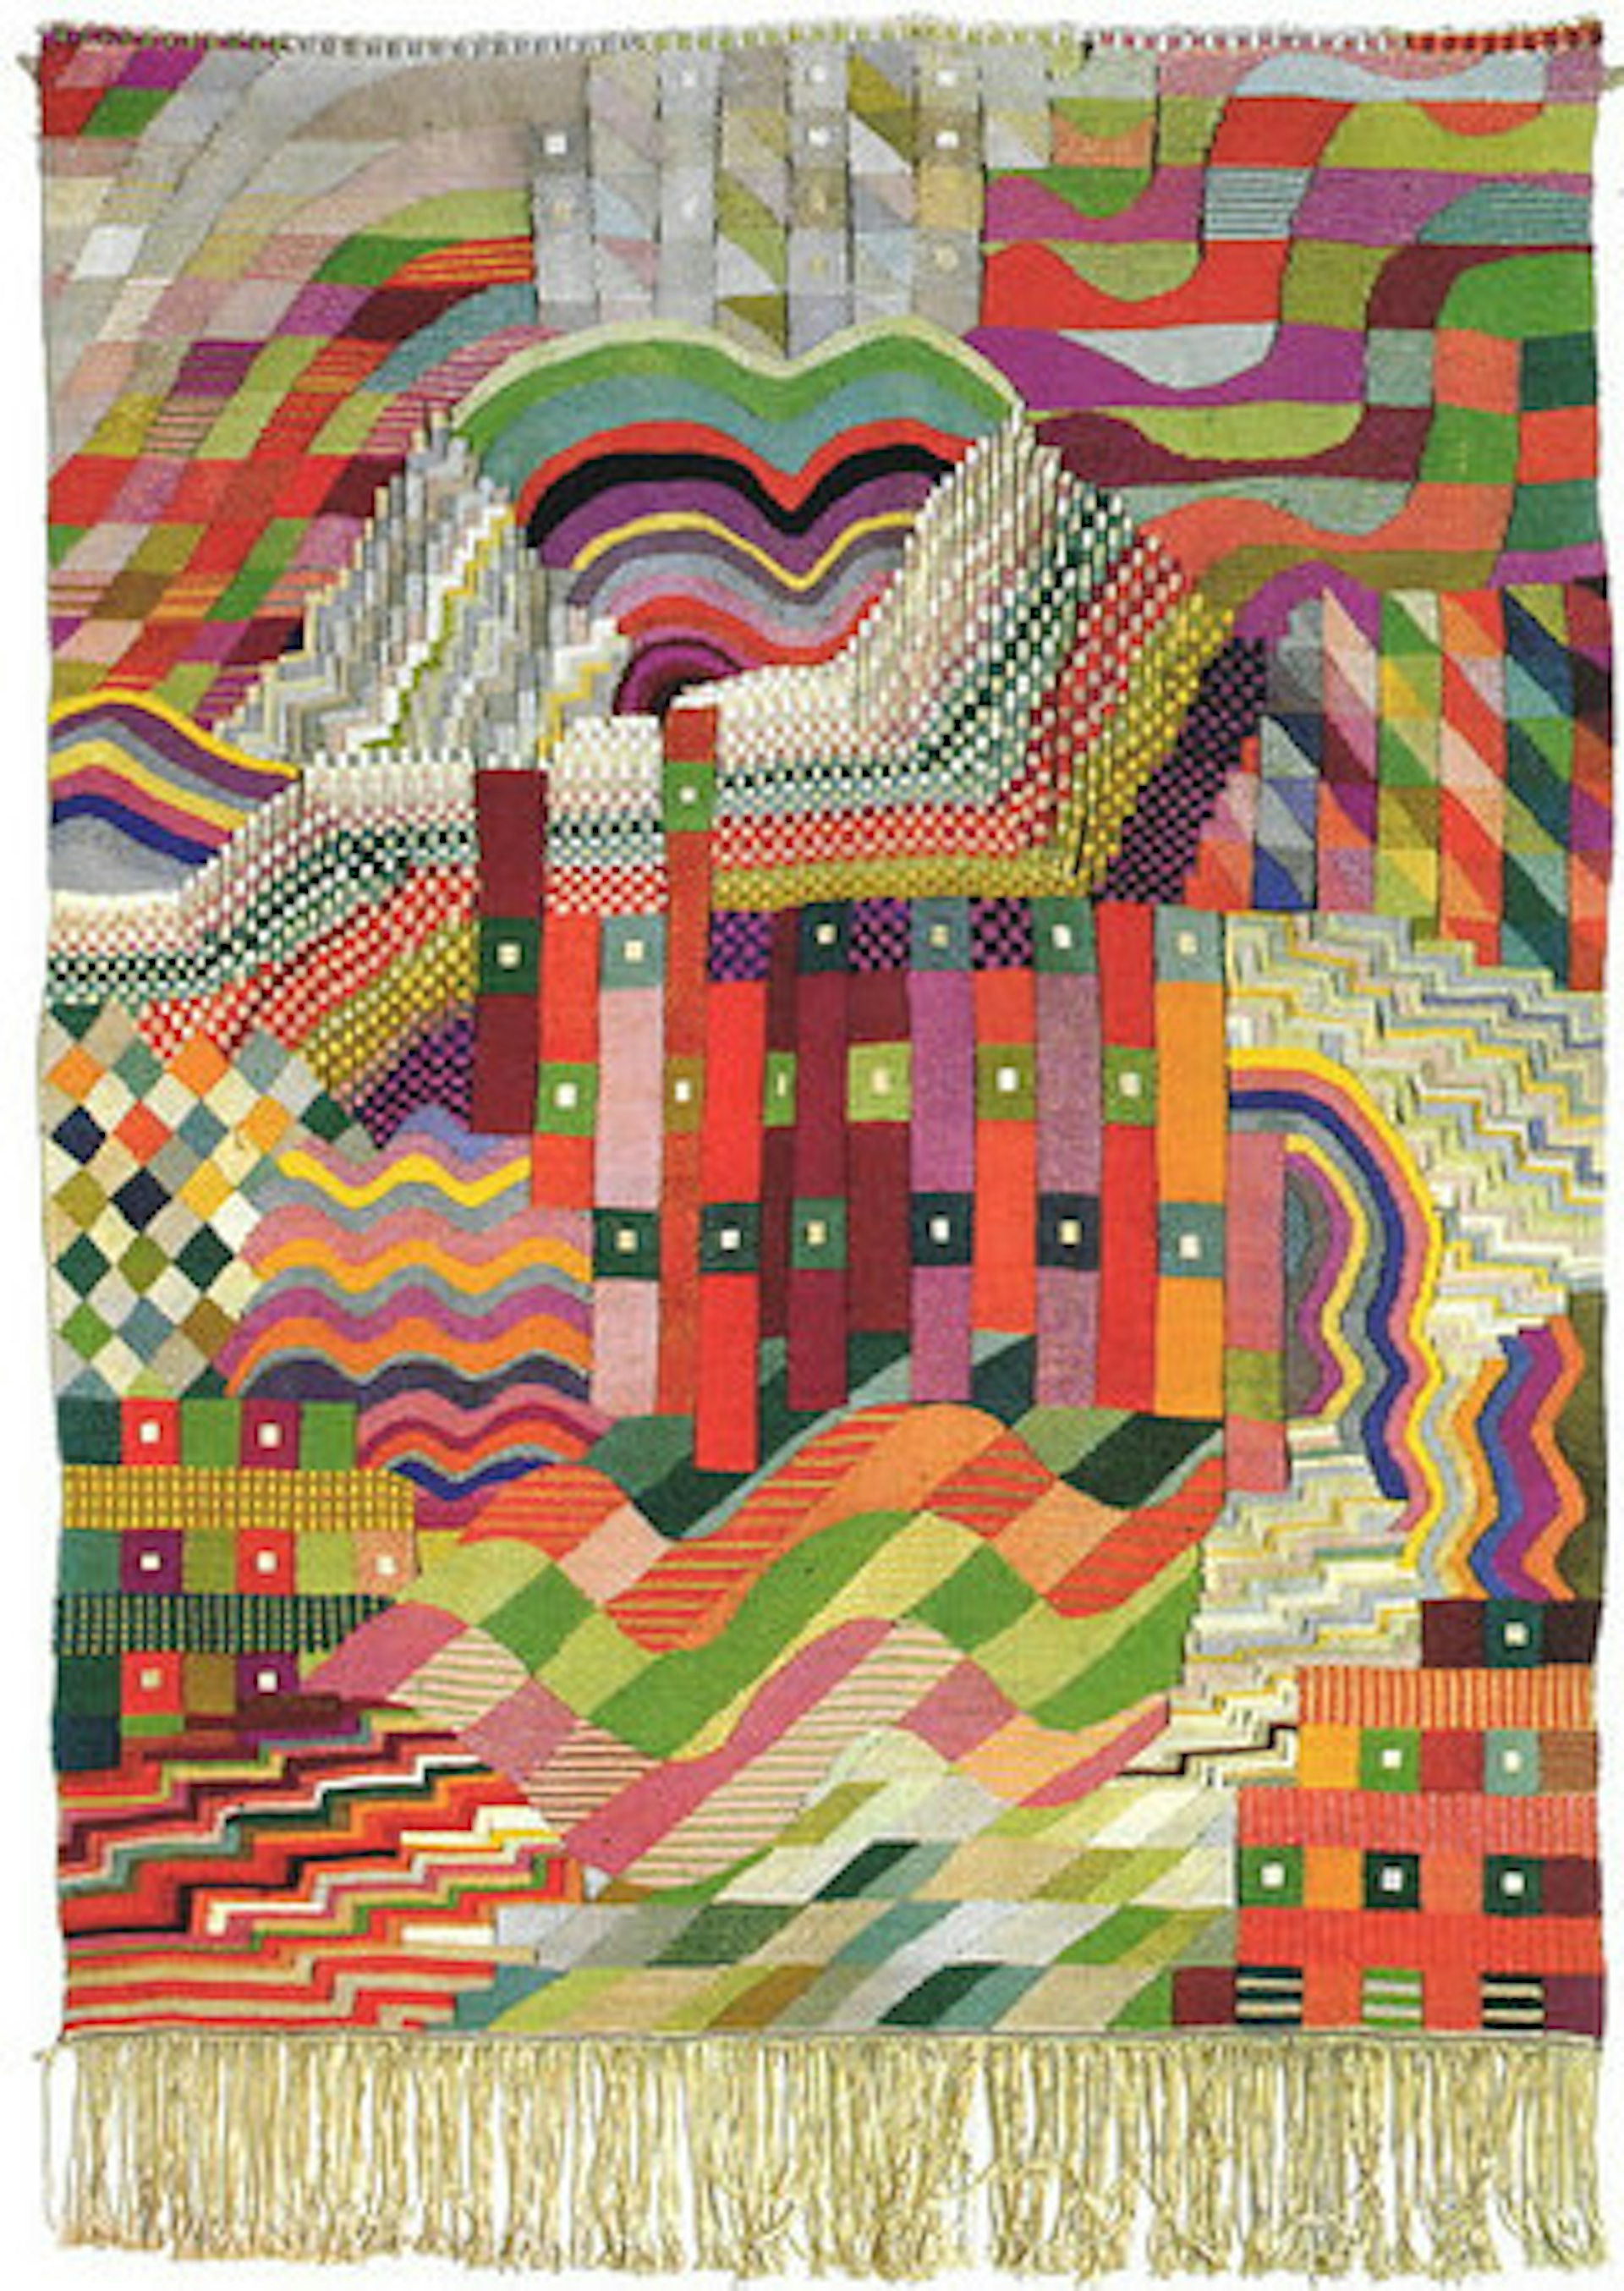 Wall hanging - "Slit Tapestry Red/Green"  1927/28 